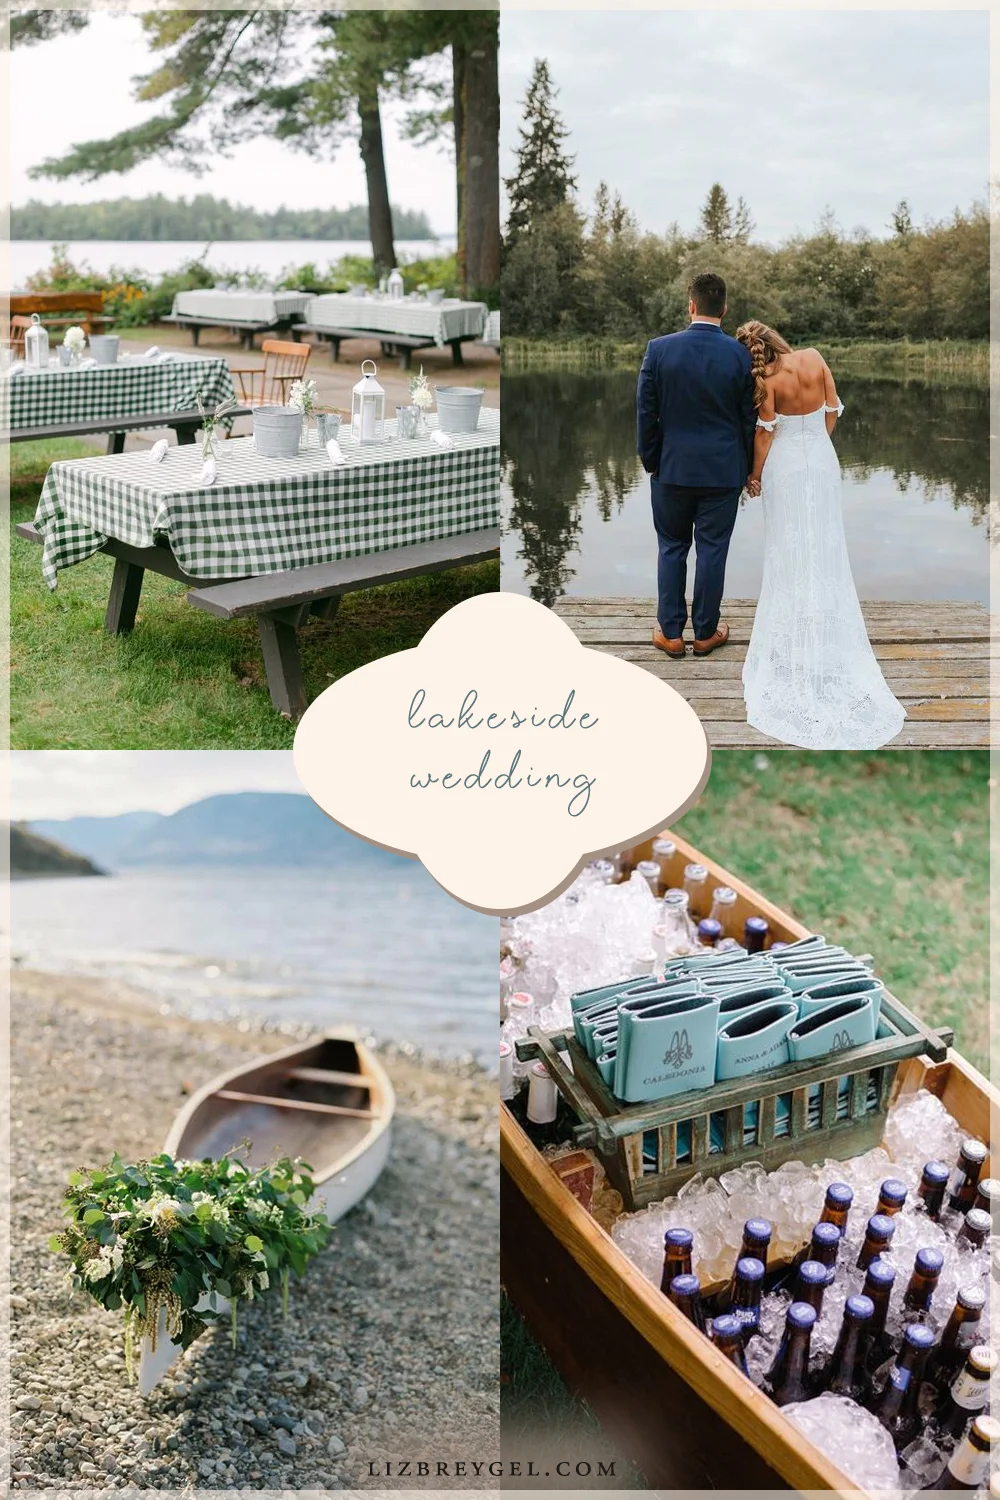 diy ideas and decorations for lakeside wedding ceremony